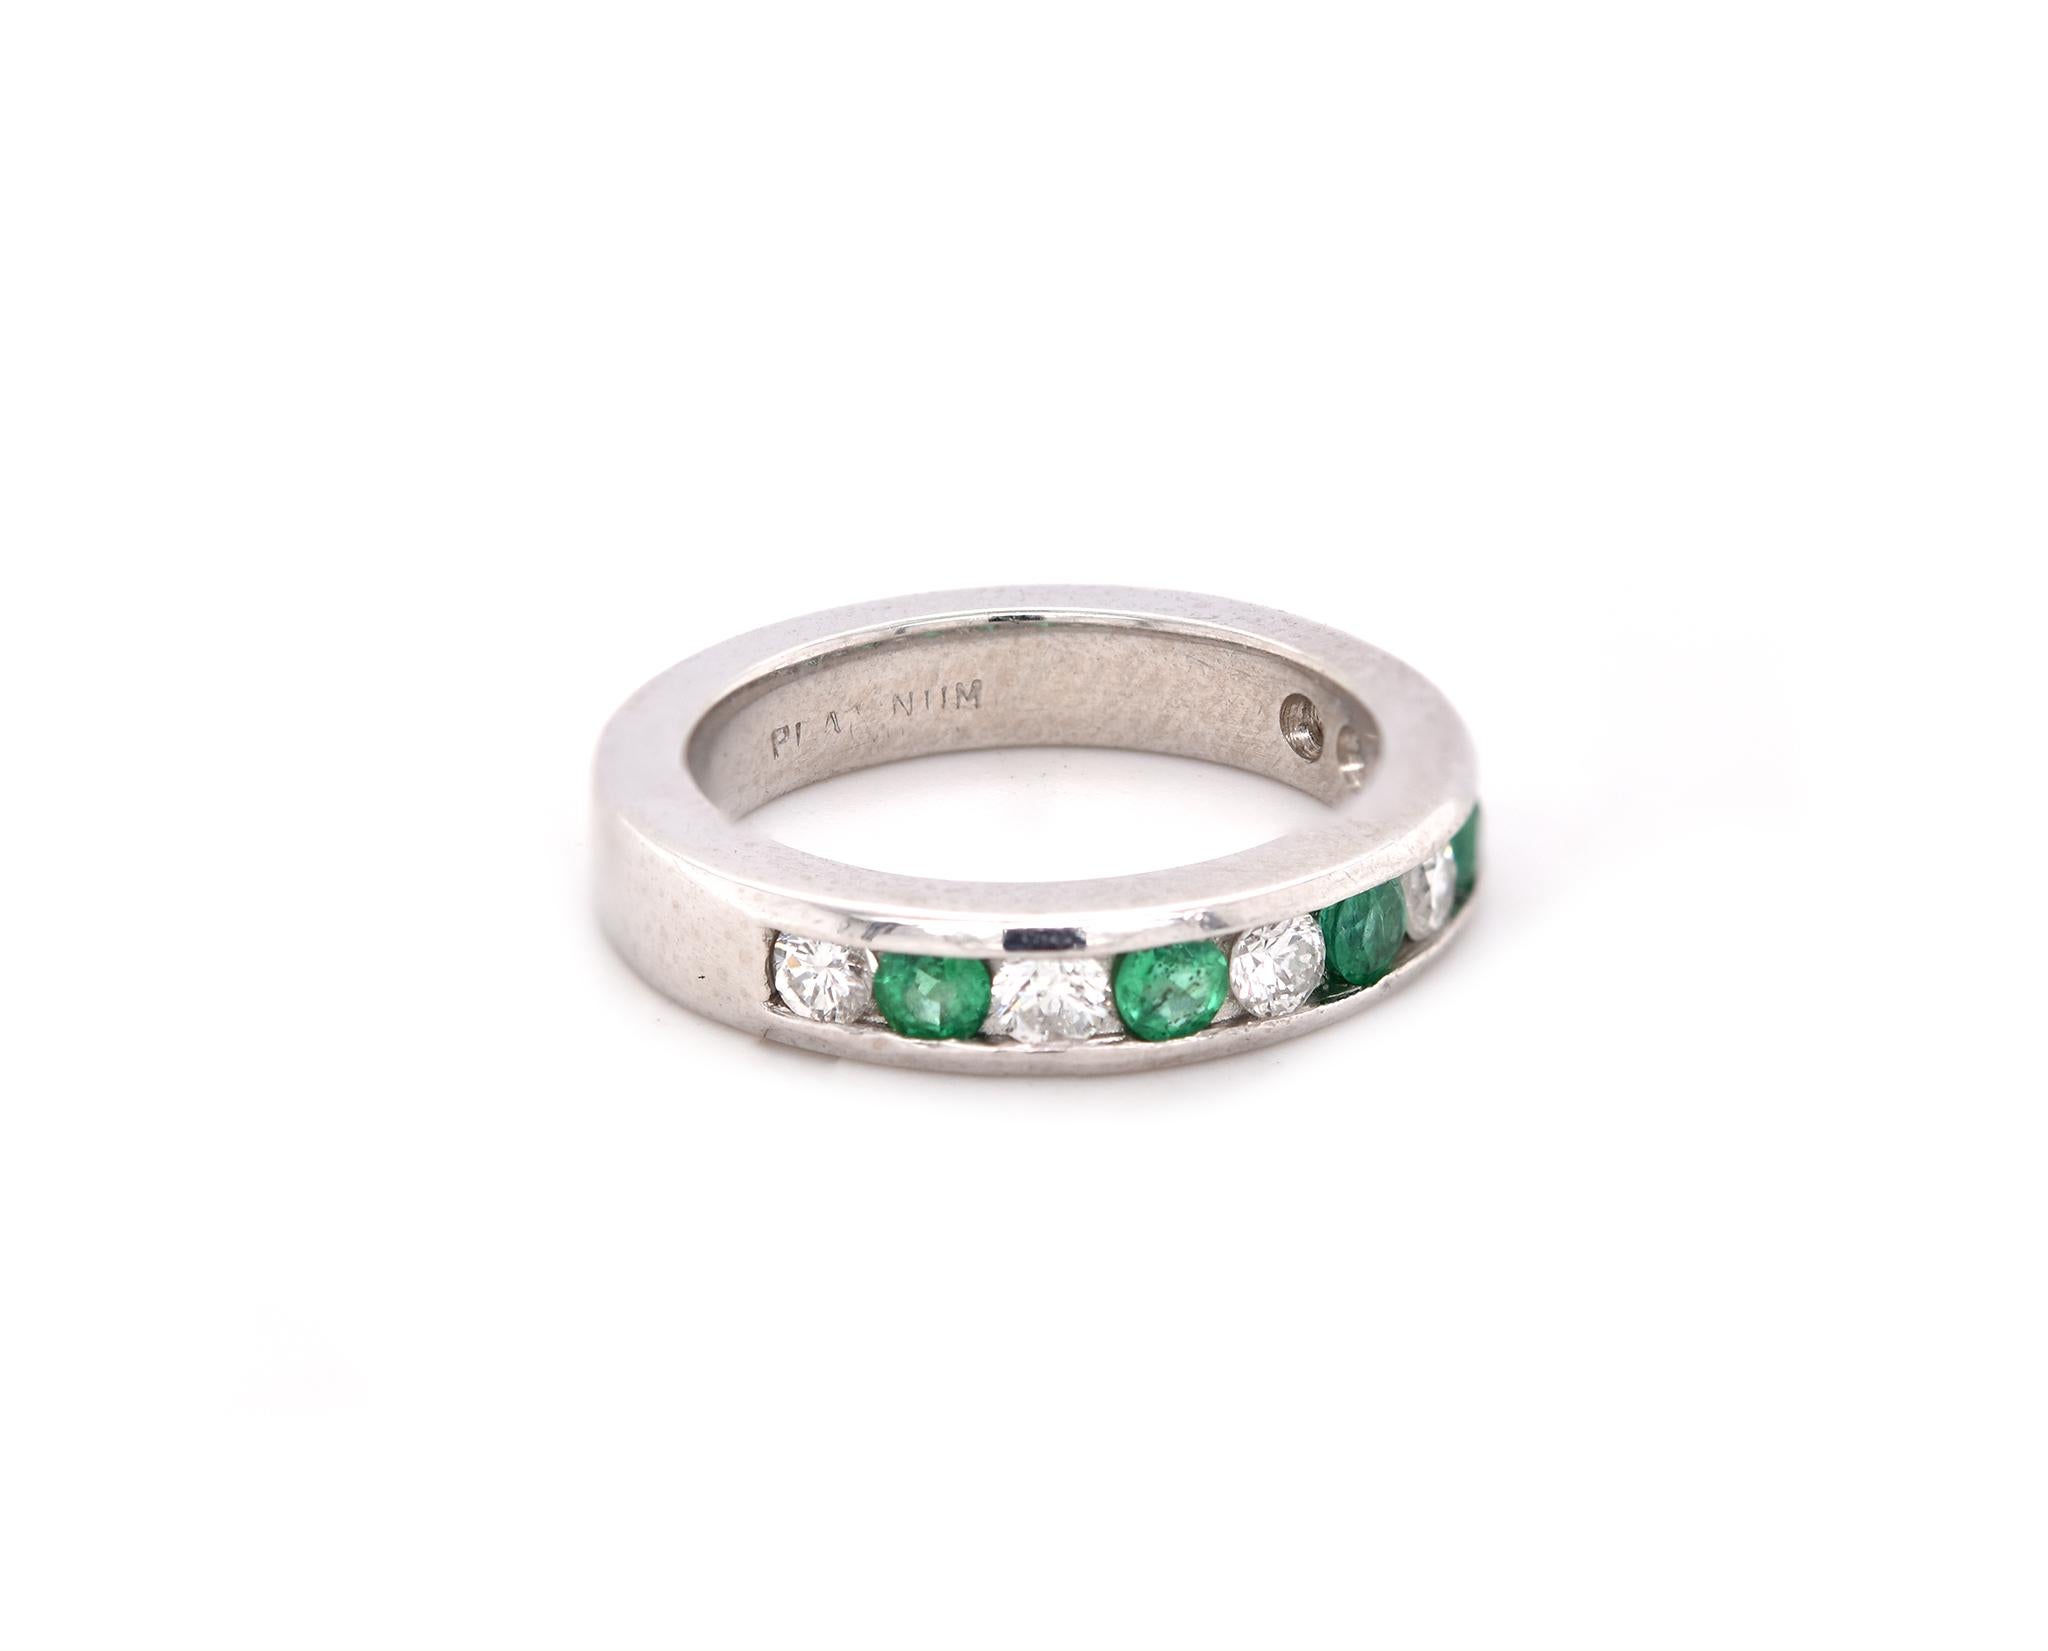 Material: platinum
Diamond: 6 round cut = .30cttw
Color: H
Clarity: VS2
Emerald: 5 round cut = .15cttw
Ring Size: 4.25 (please allow up to 2 additional business days for sizing requests)
Dimensions: ring top measures 3.55mm wide
Weight: 7.7 grams
